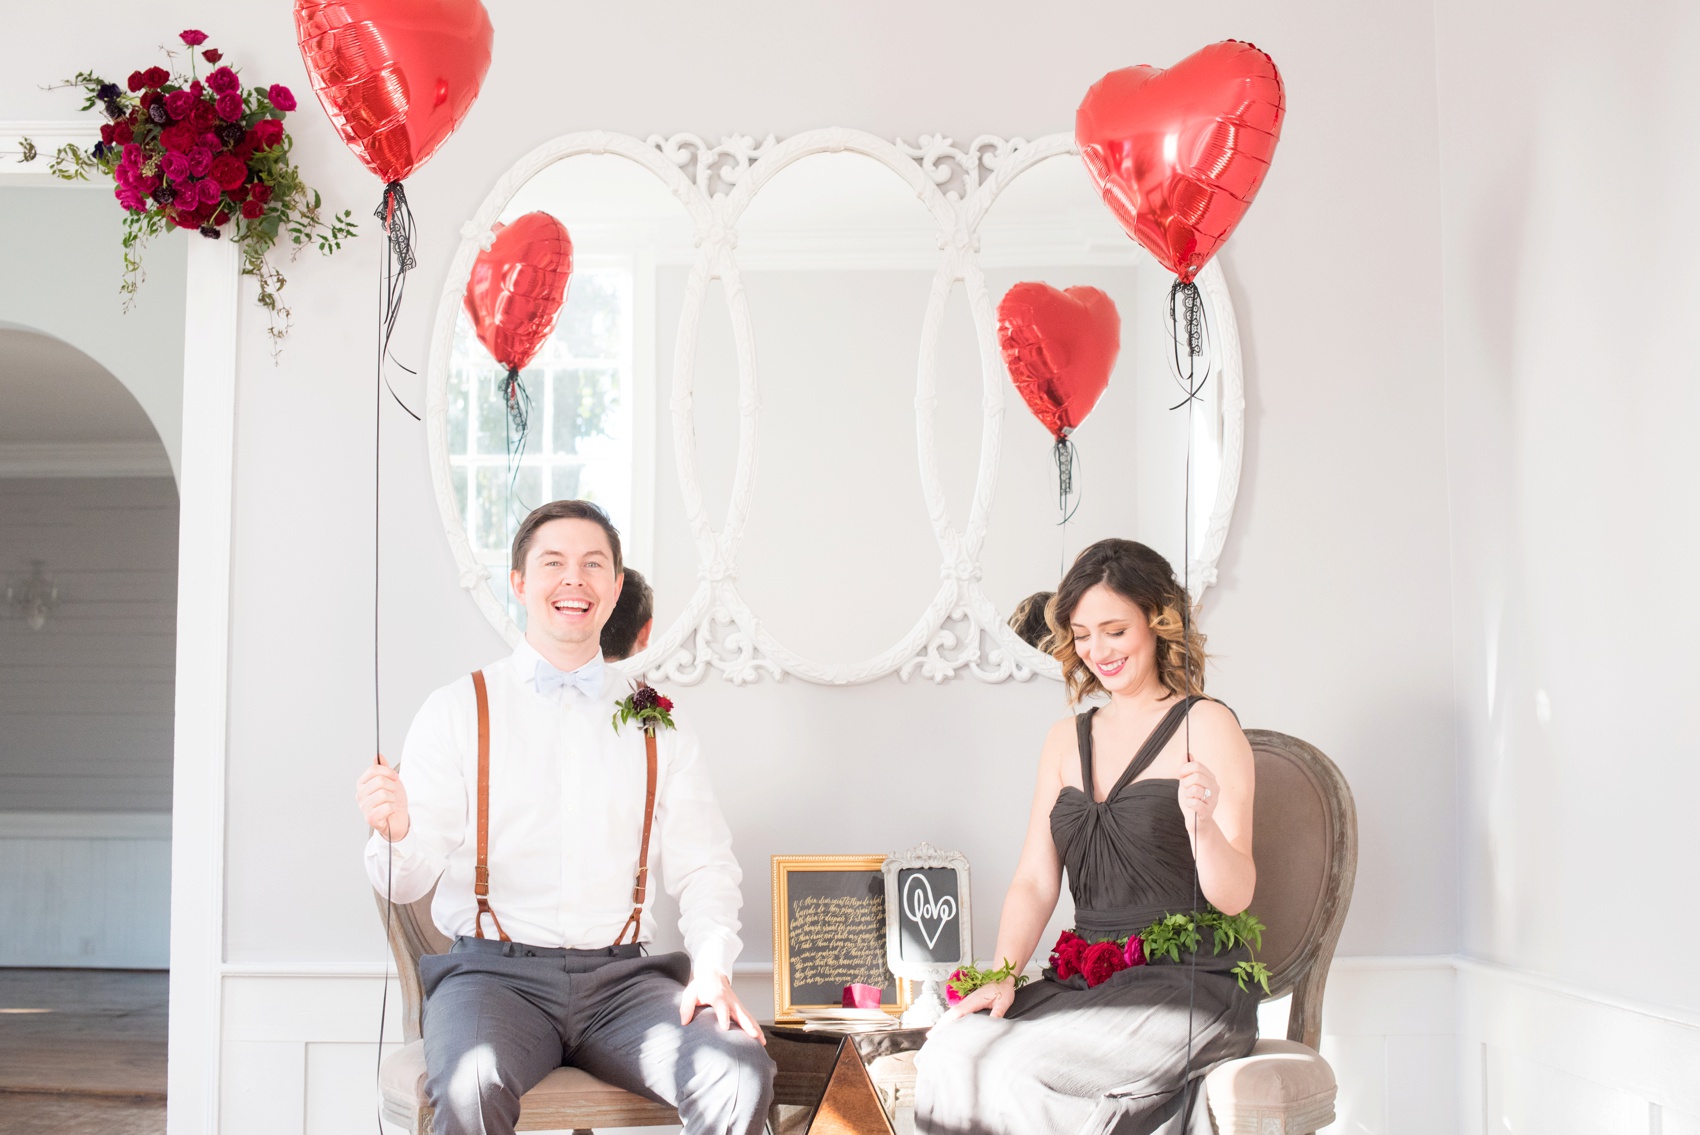 Leslie-Alford Mim's House NC marriage proposal photos by Mikkel Paige Photography. Red balloons and grey Amsale gown.